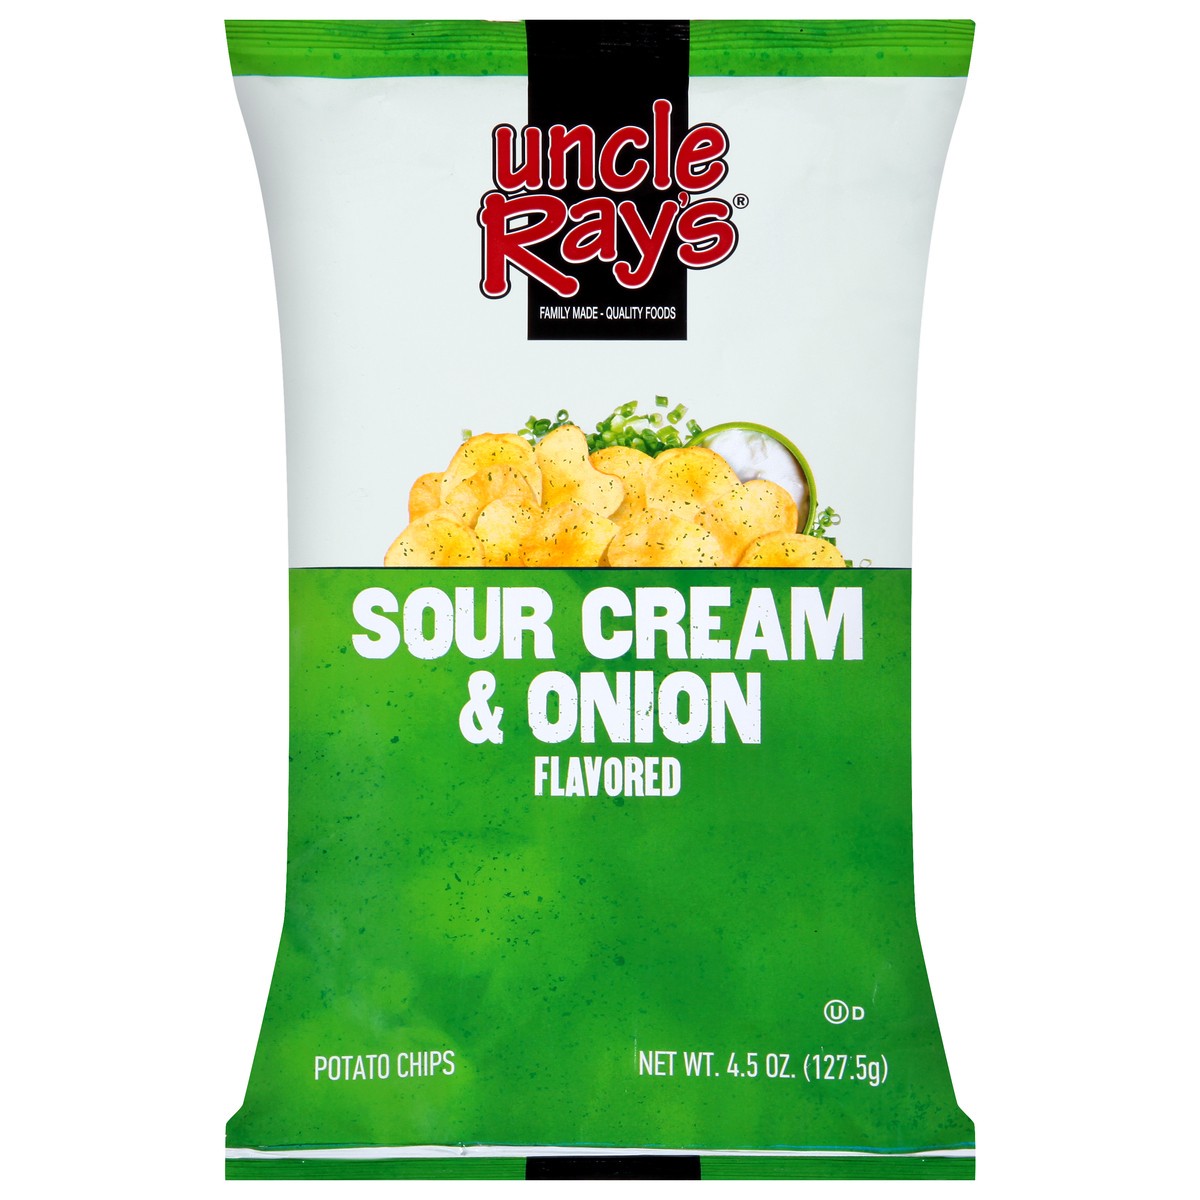 slide 12 of 13, Uncle Ray's Sour Cream & Onion Flavored Potato Chips 4.5 oz, 4.5 oz